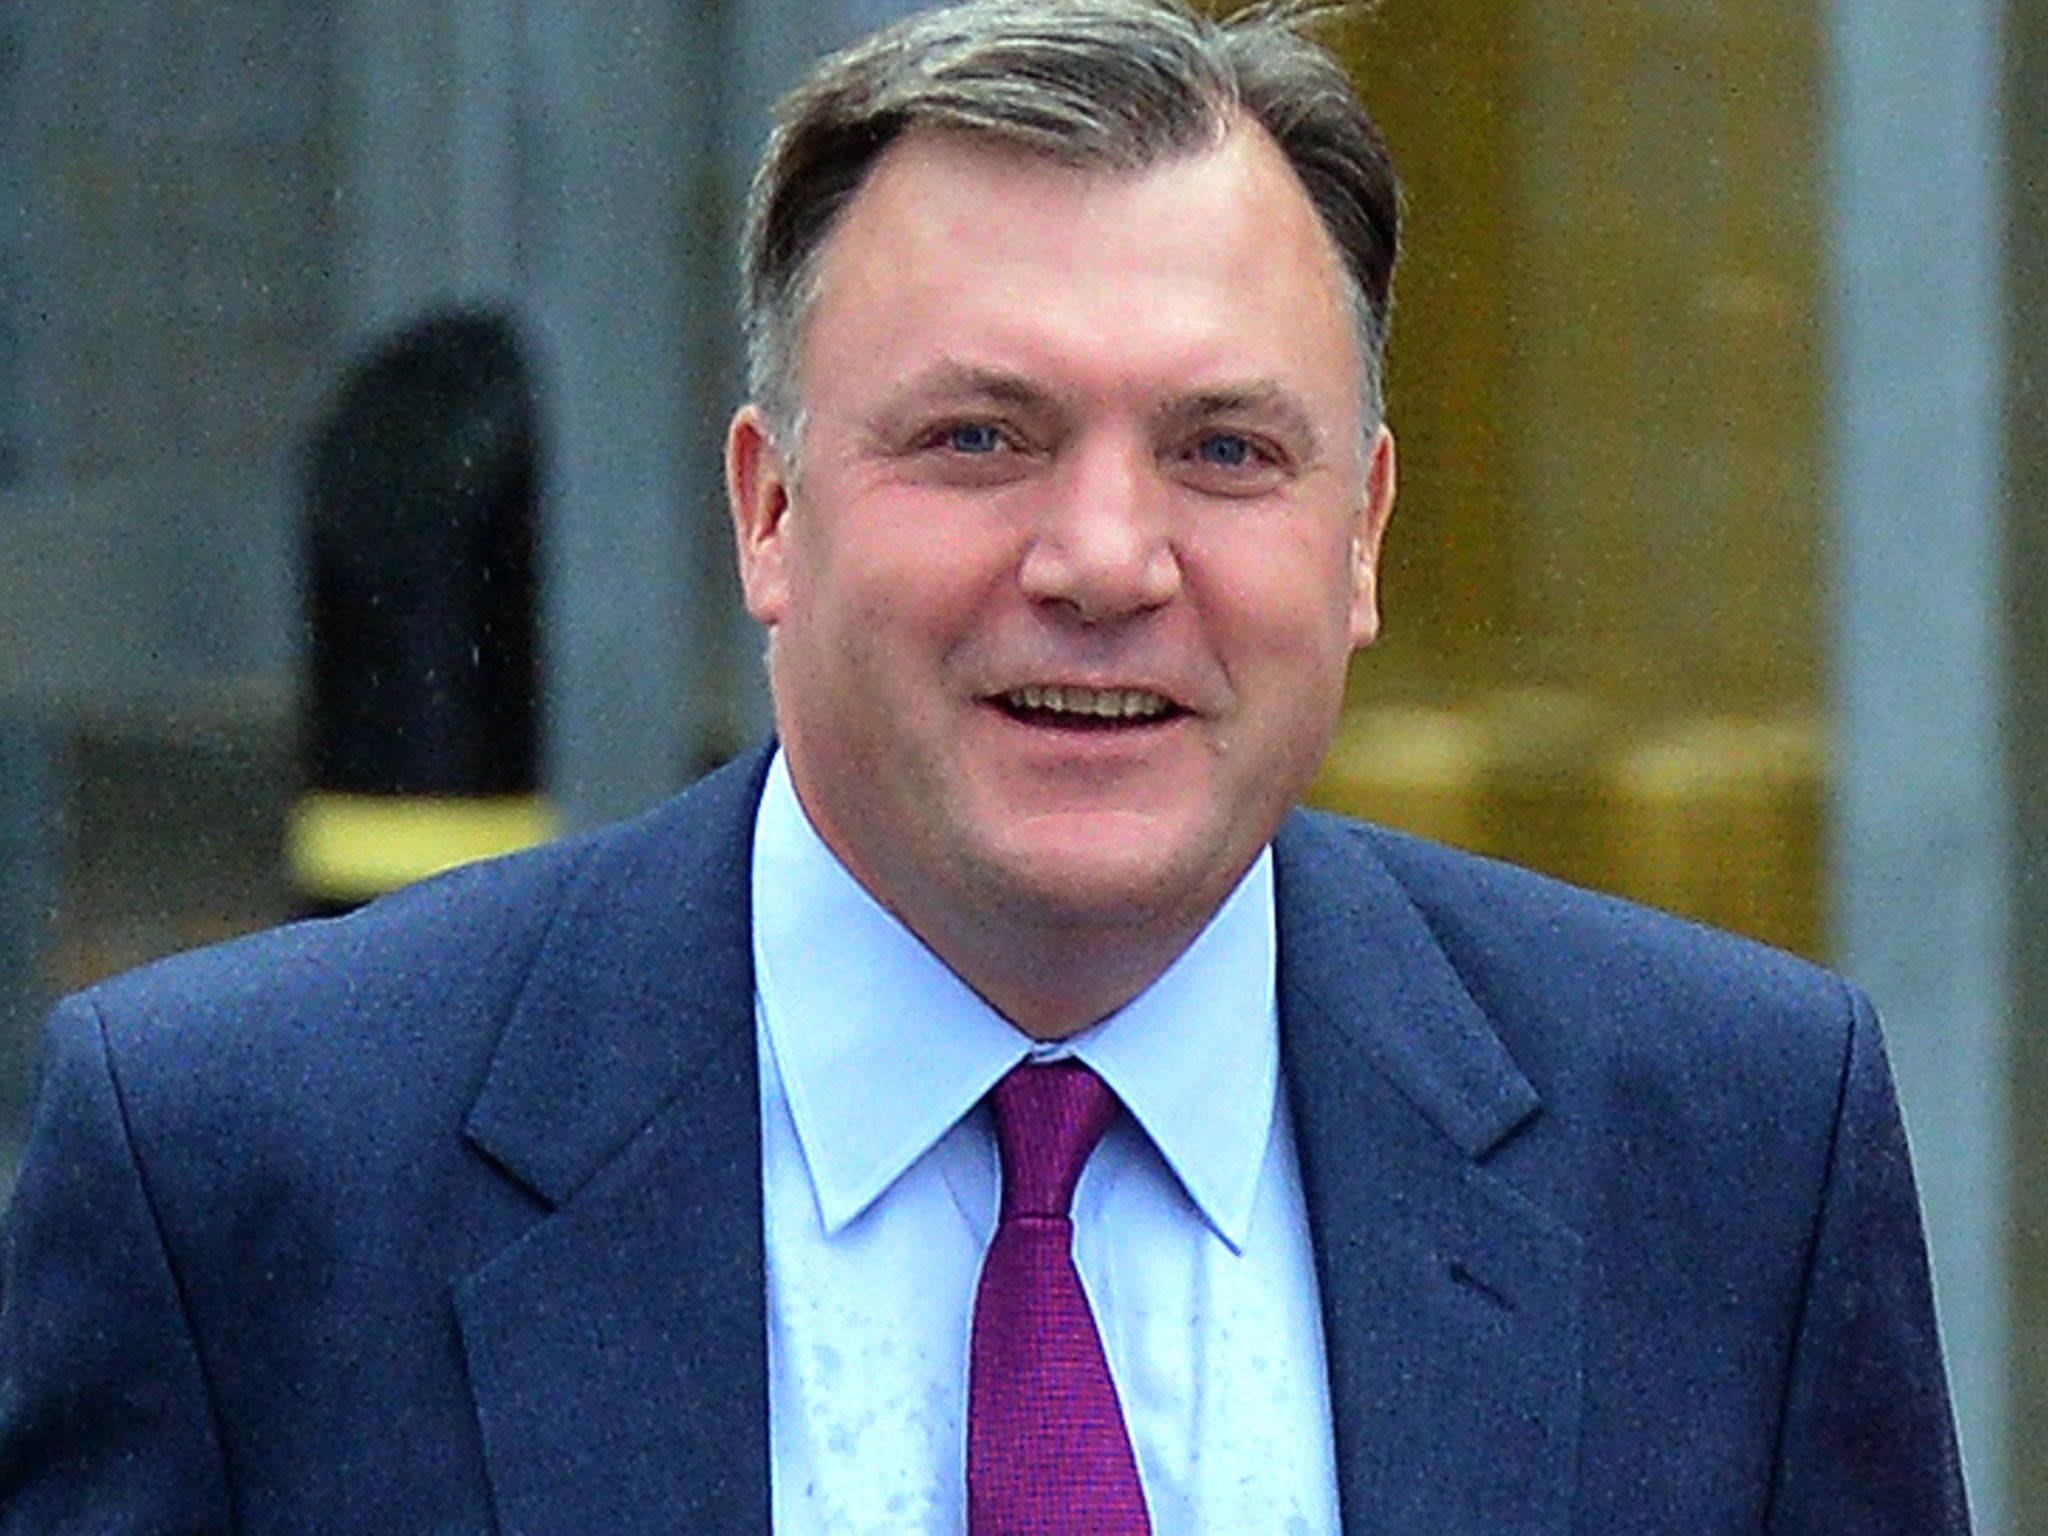 Labour's Ed Balls has admitted to being caught running a red light